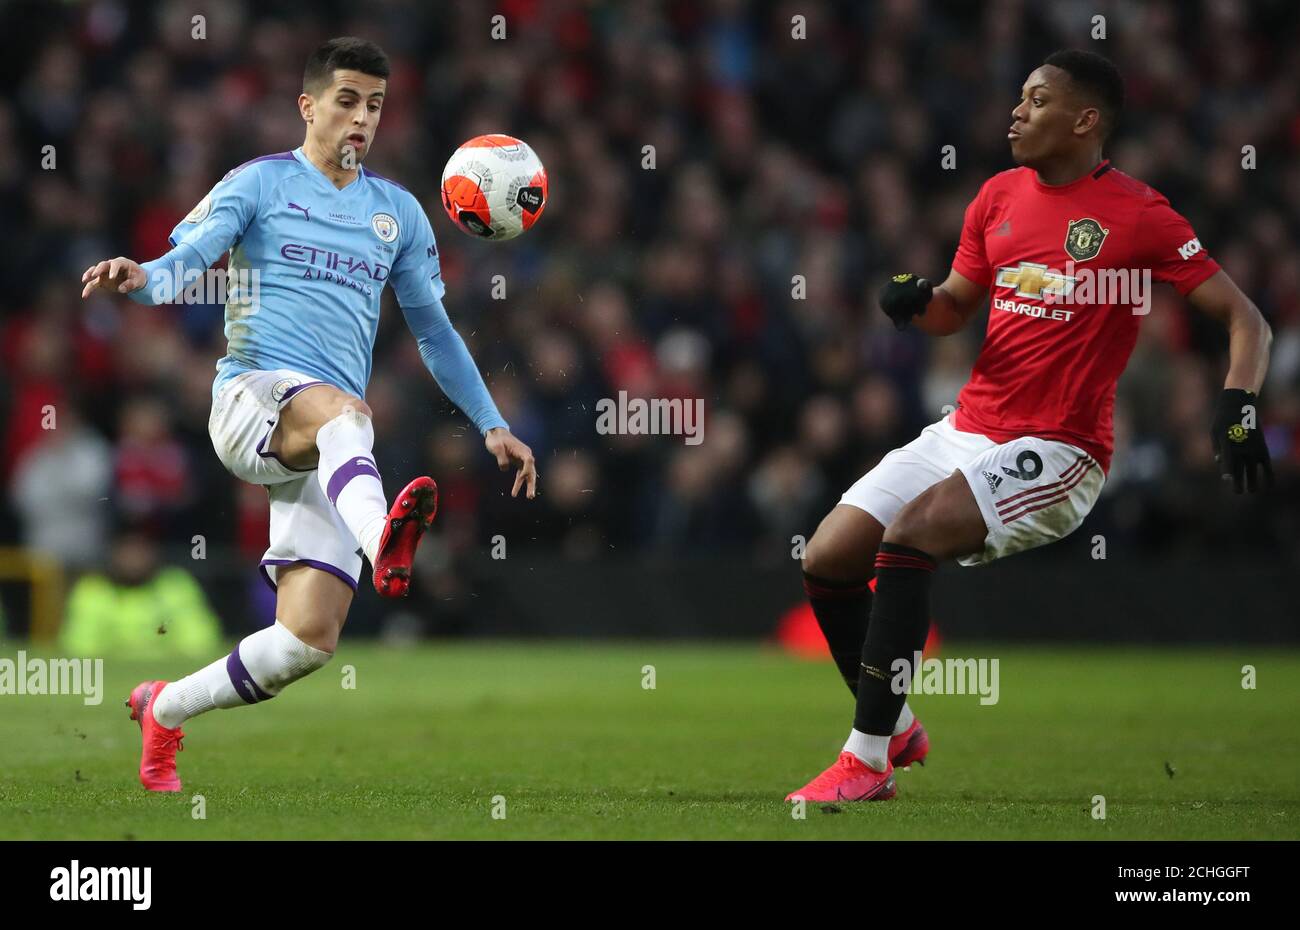 Manchester City's Joao Cancelo controls ball away from Manchester United's Anthony Martial during the Premier League match at Old Trafford, Manchester. Stock Photo